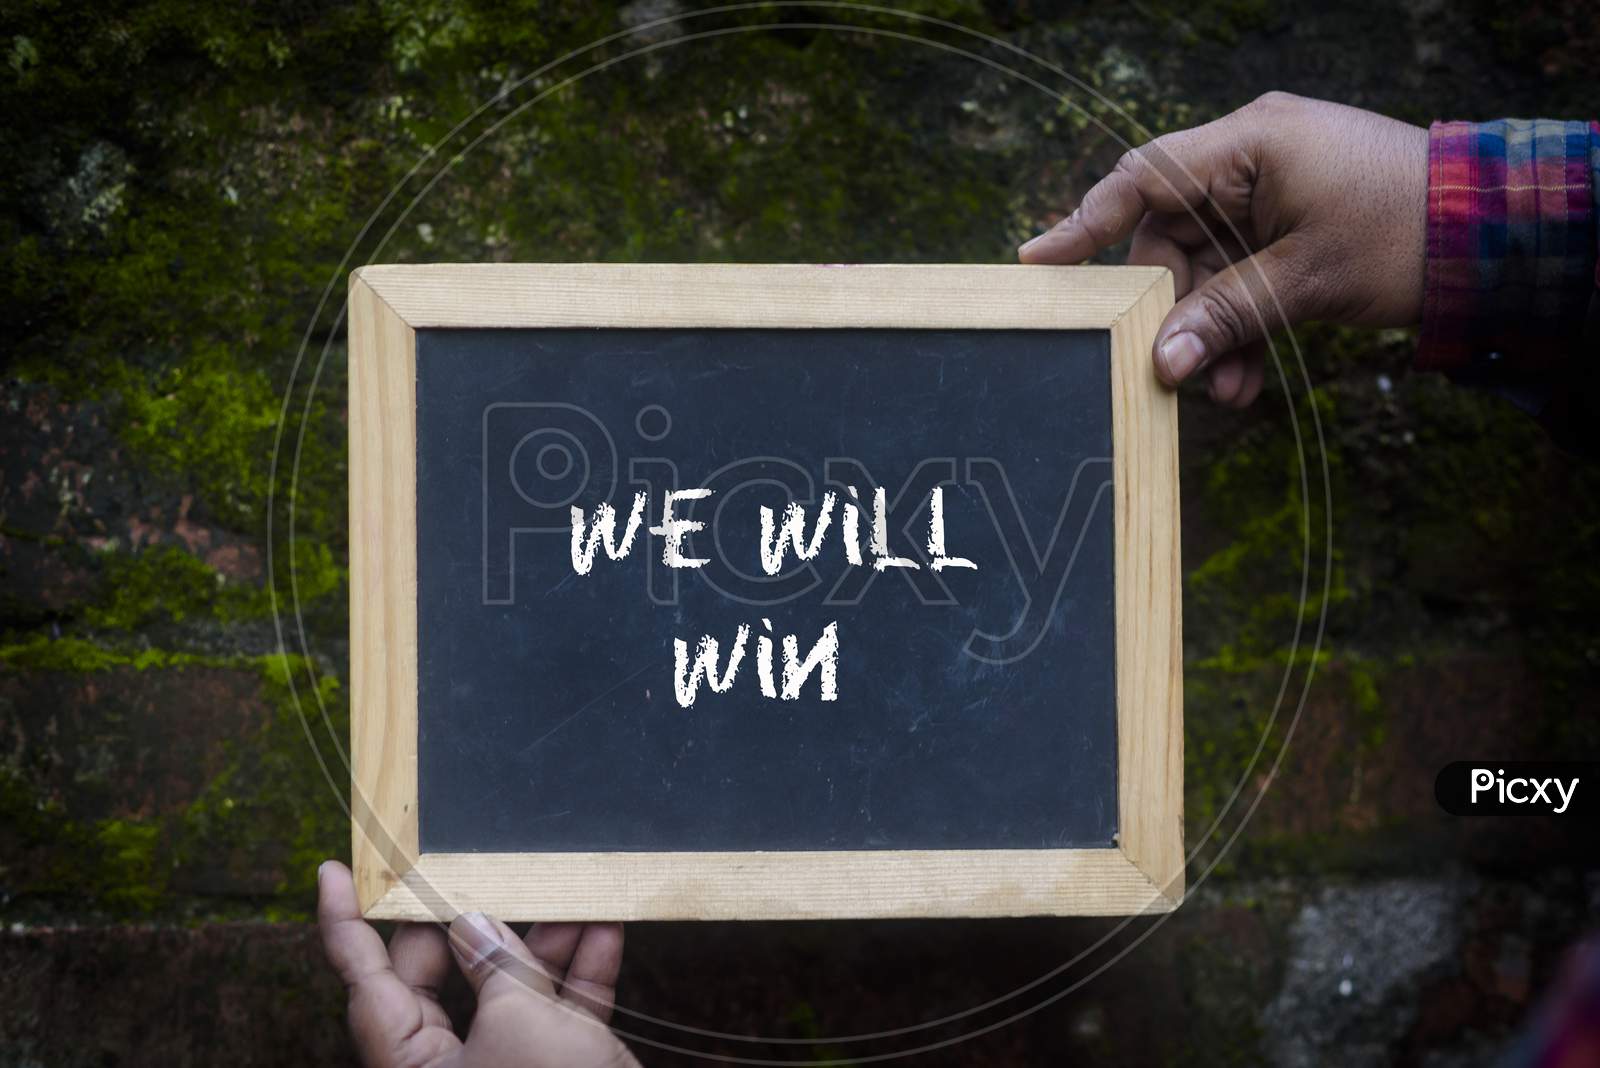 A man holding a slate with comment "We will win" to give support for coronavirus